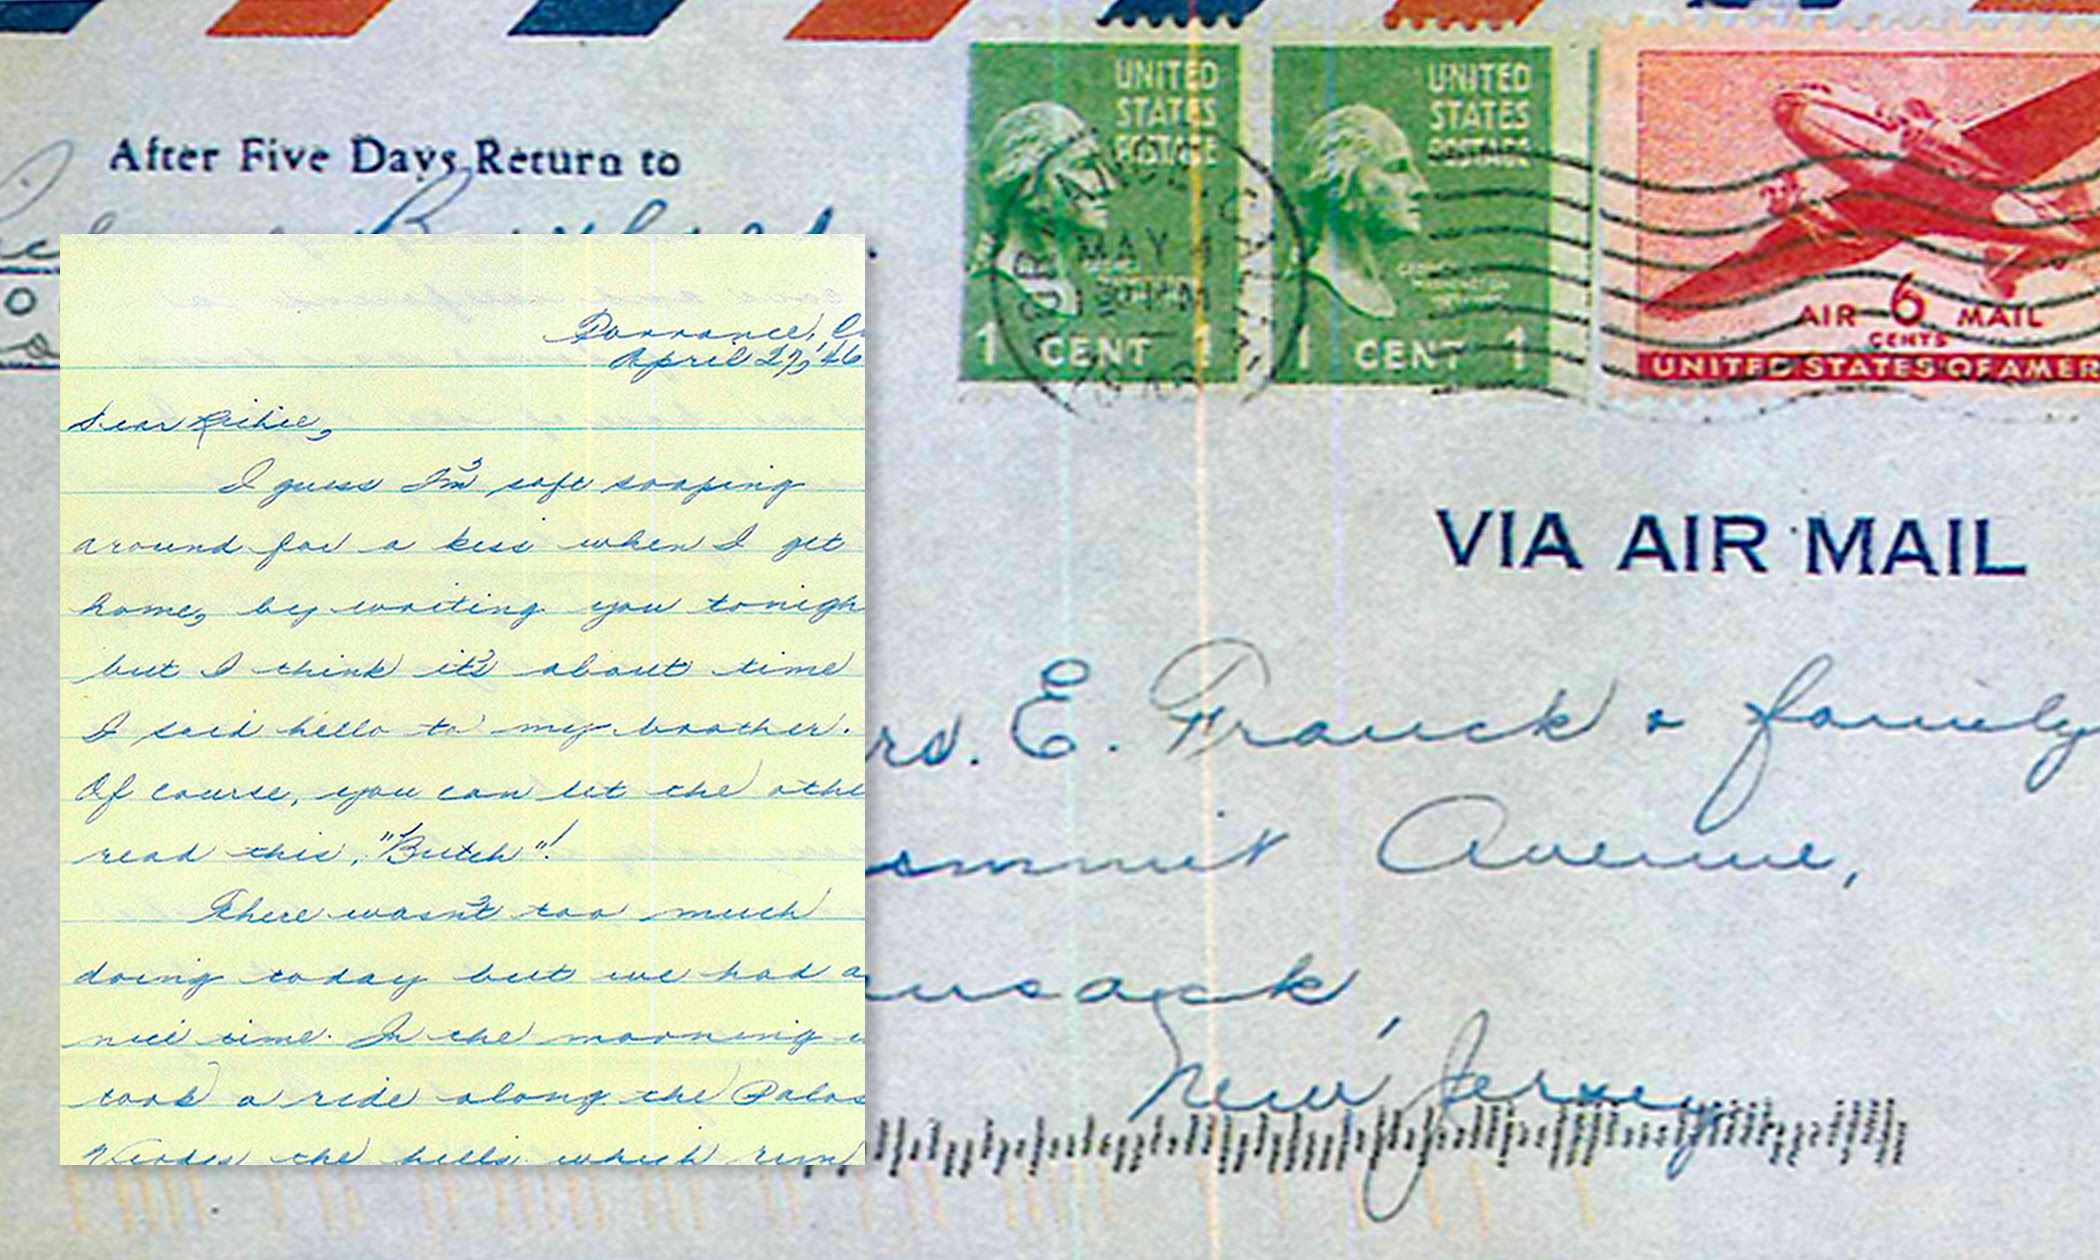 Man Finds Letters Dated 1946 Sent to His Mailbox, Reunites Them With Sender’s Family